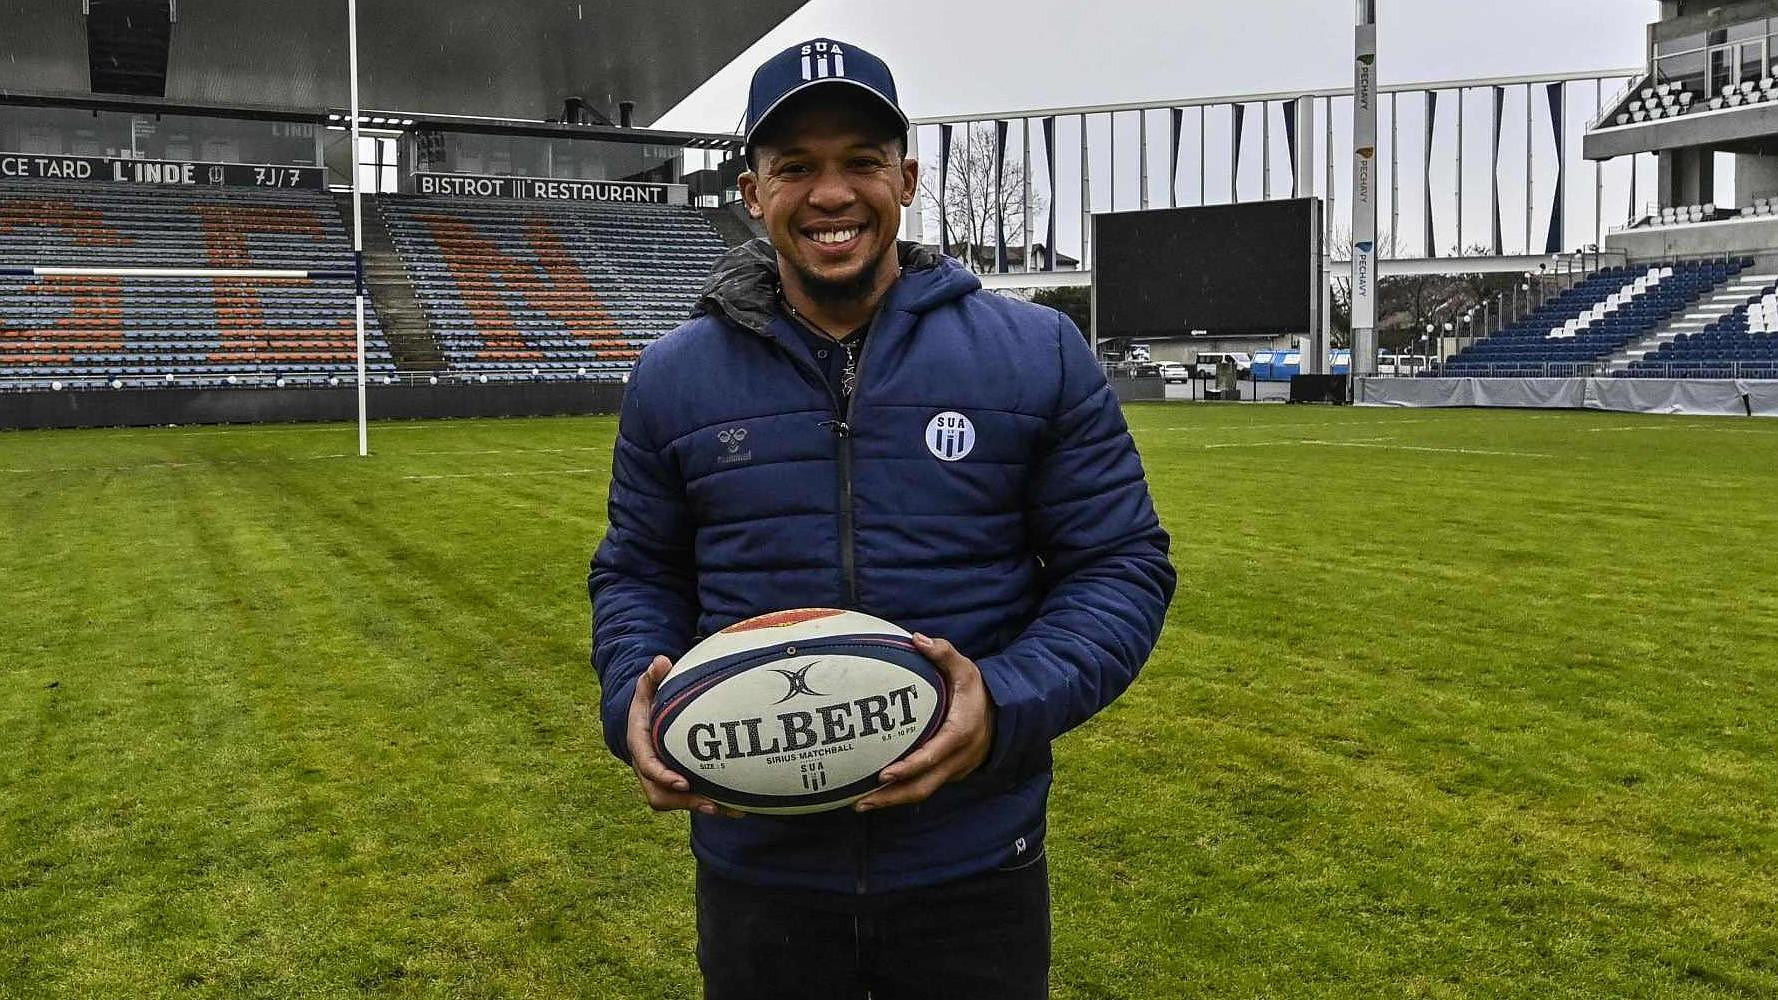 Rugby: former Springbok opener Elton Jantjies suspended for four years for doping